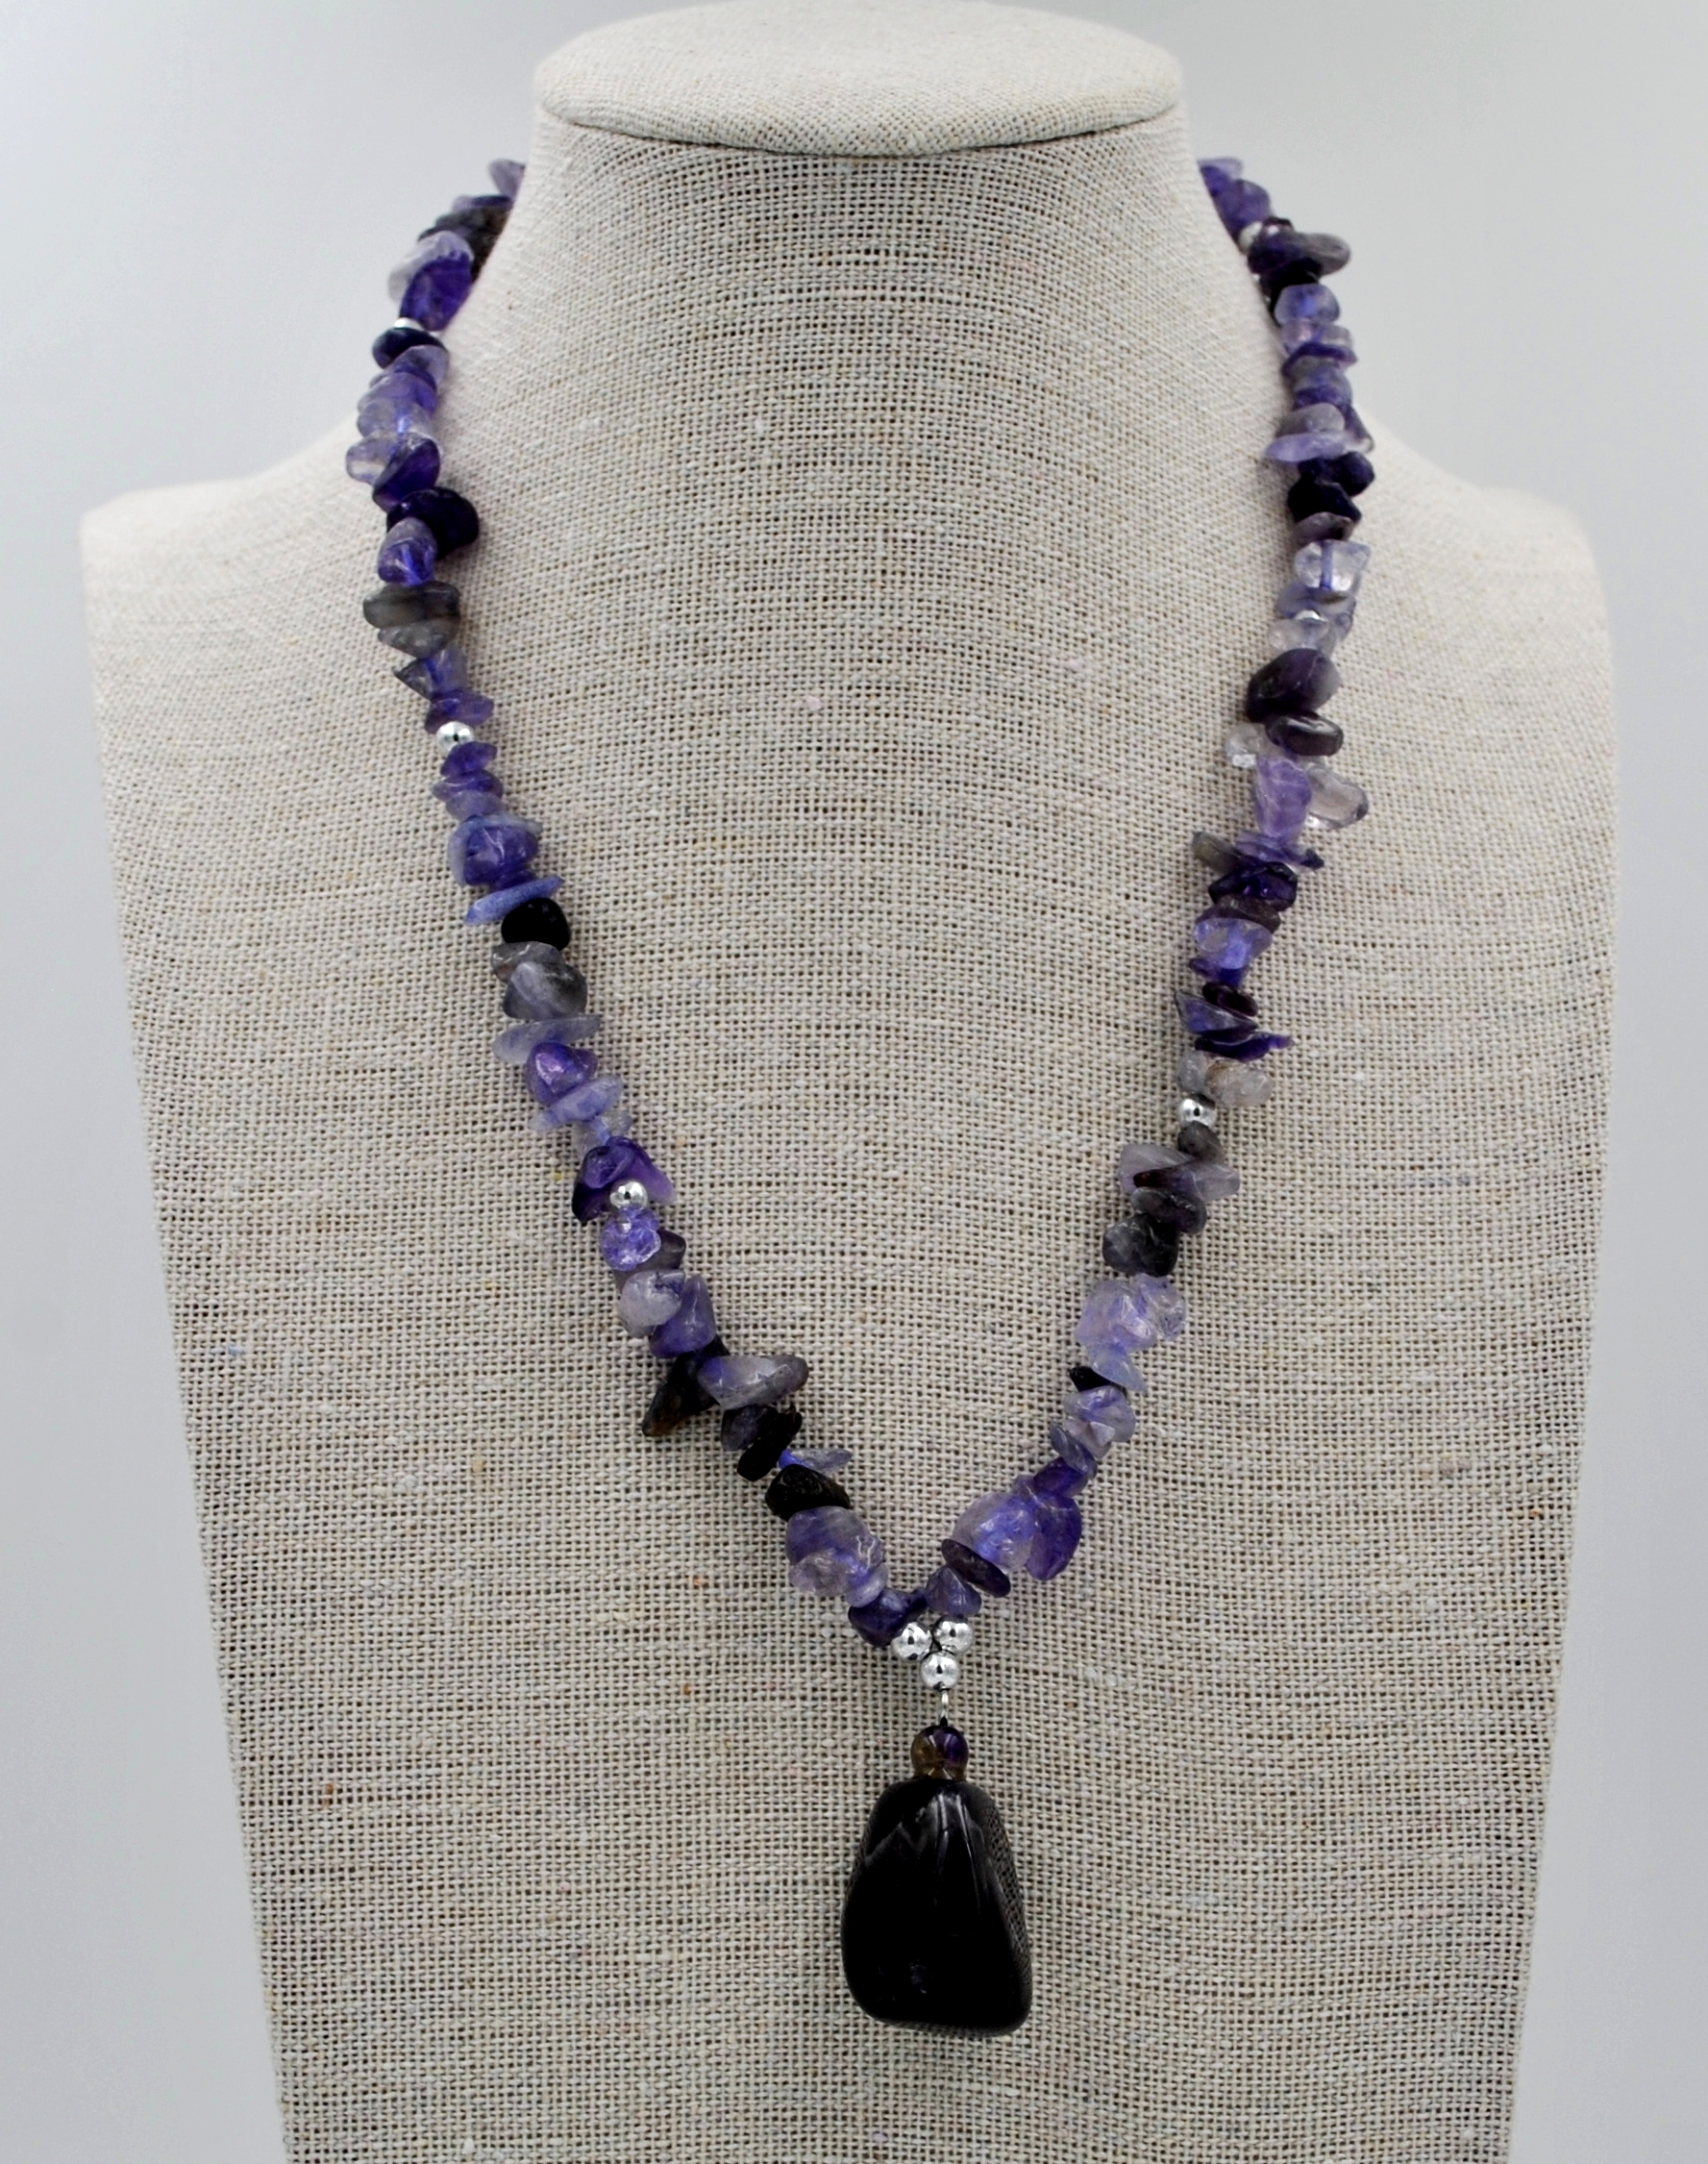 18" Amethyst Chip Stone Necklace With Nugget Pendant